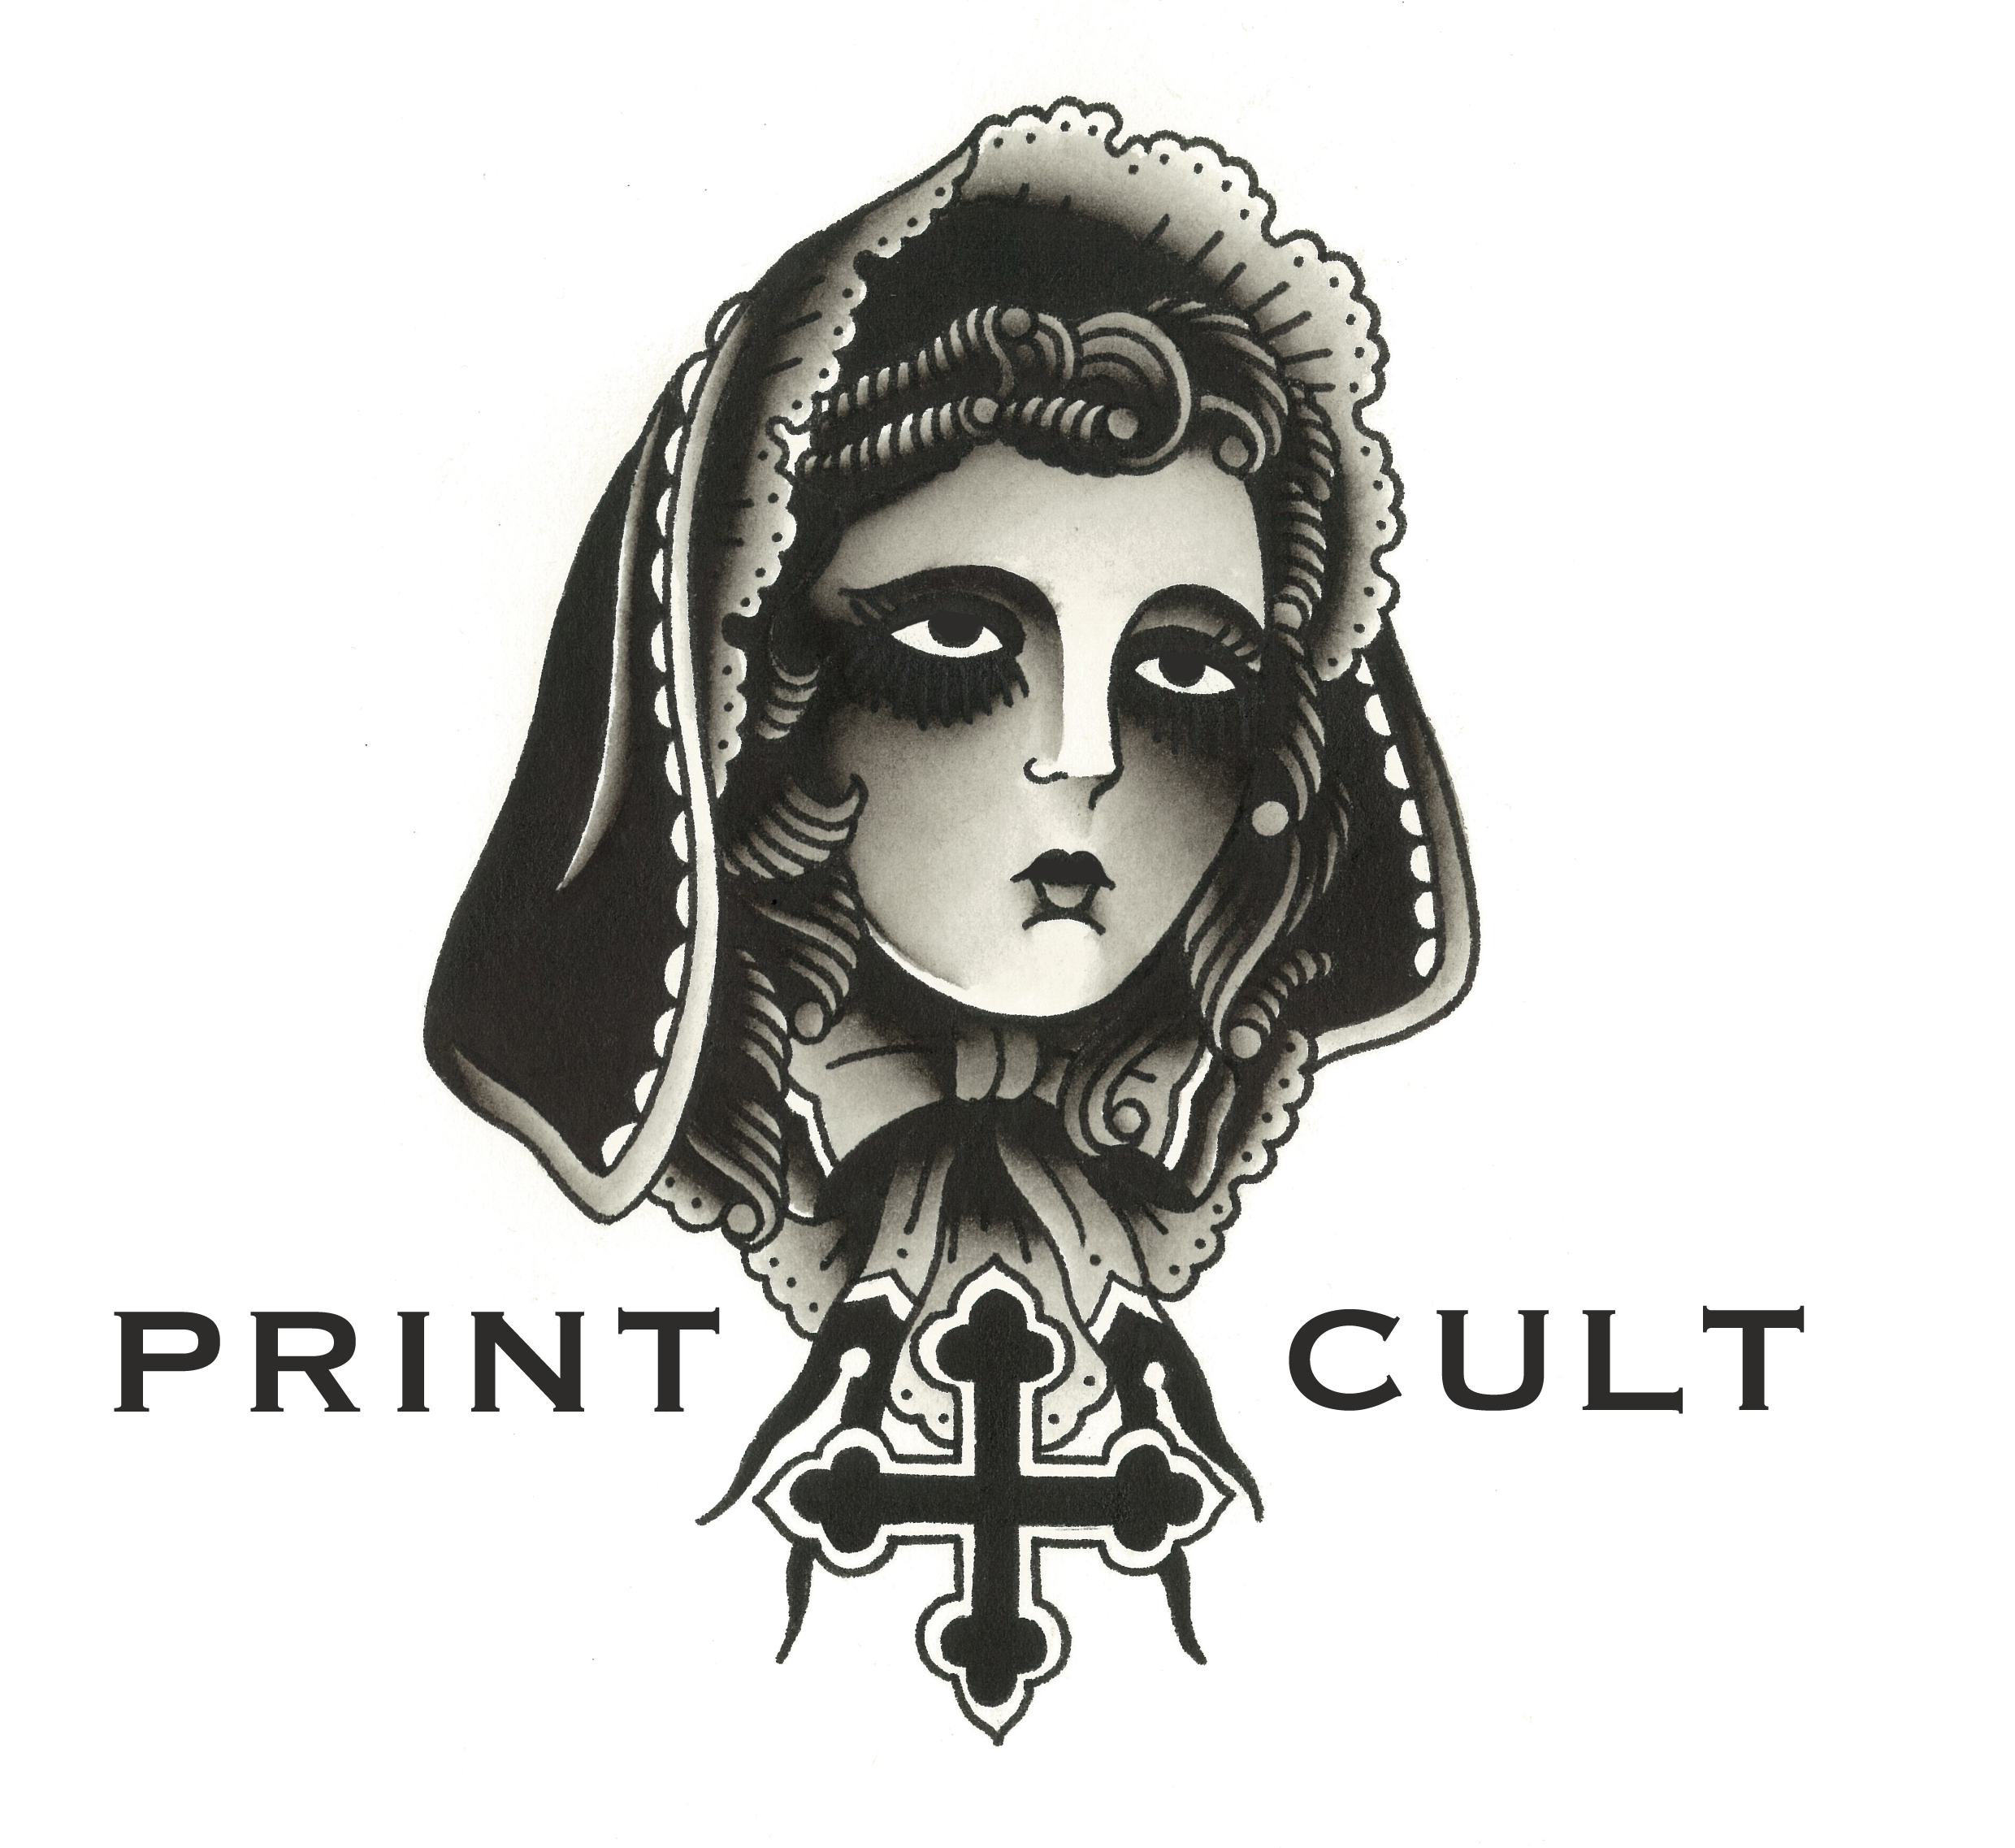 Welcome to Printcult